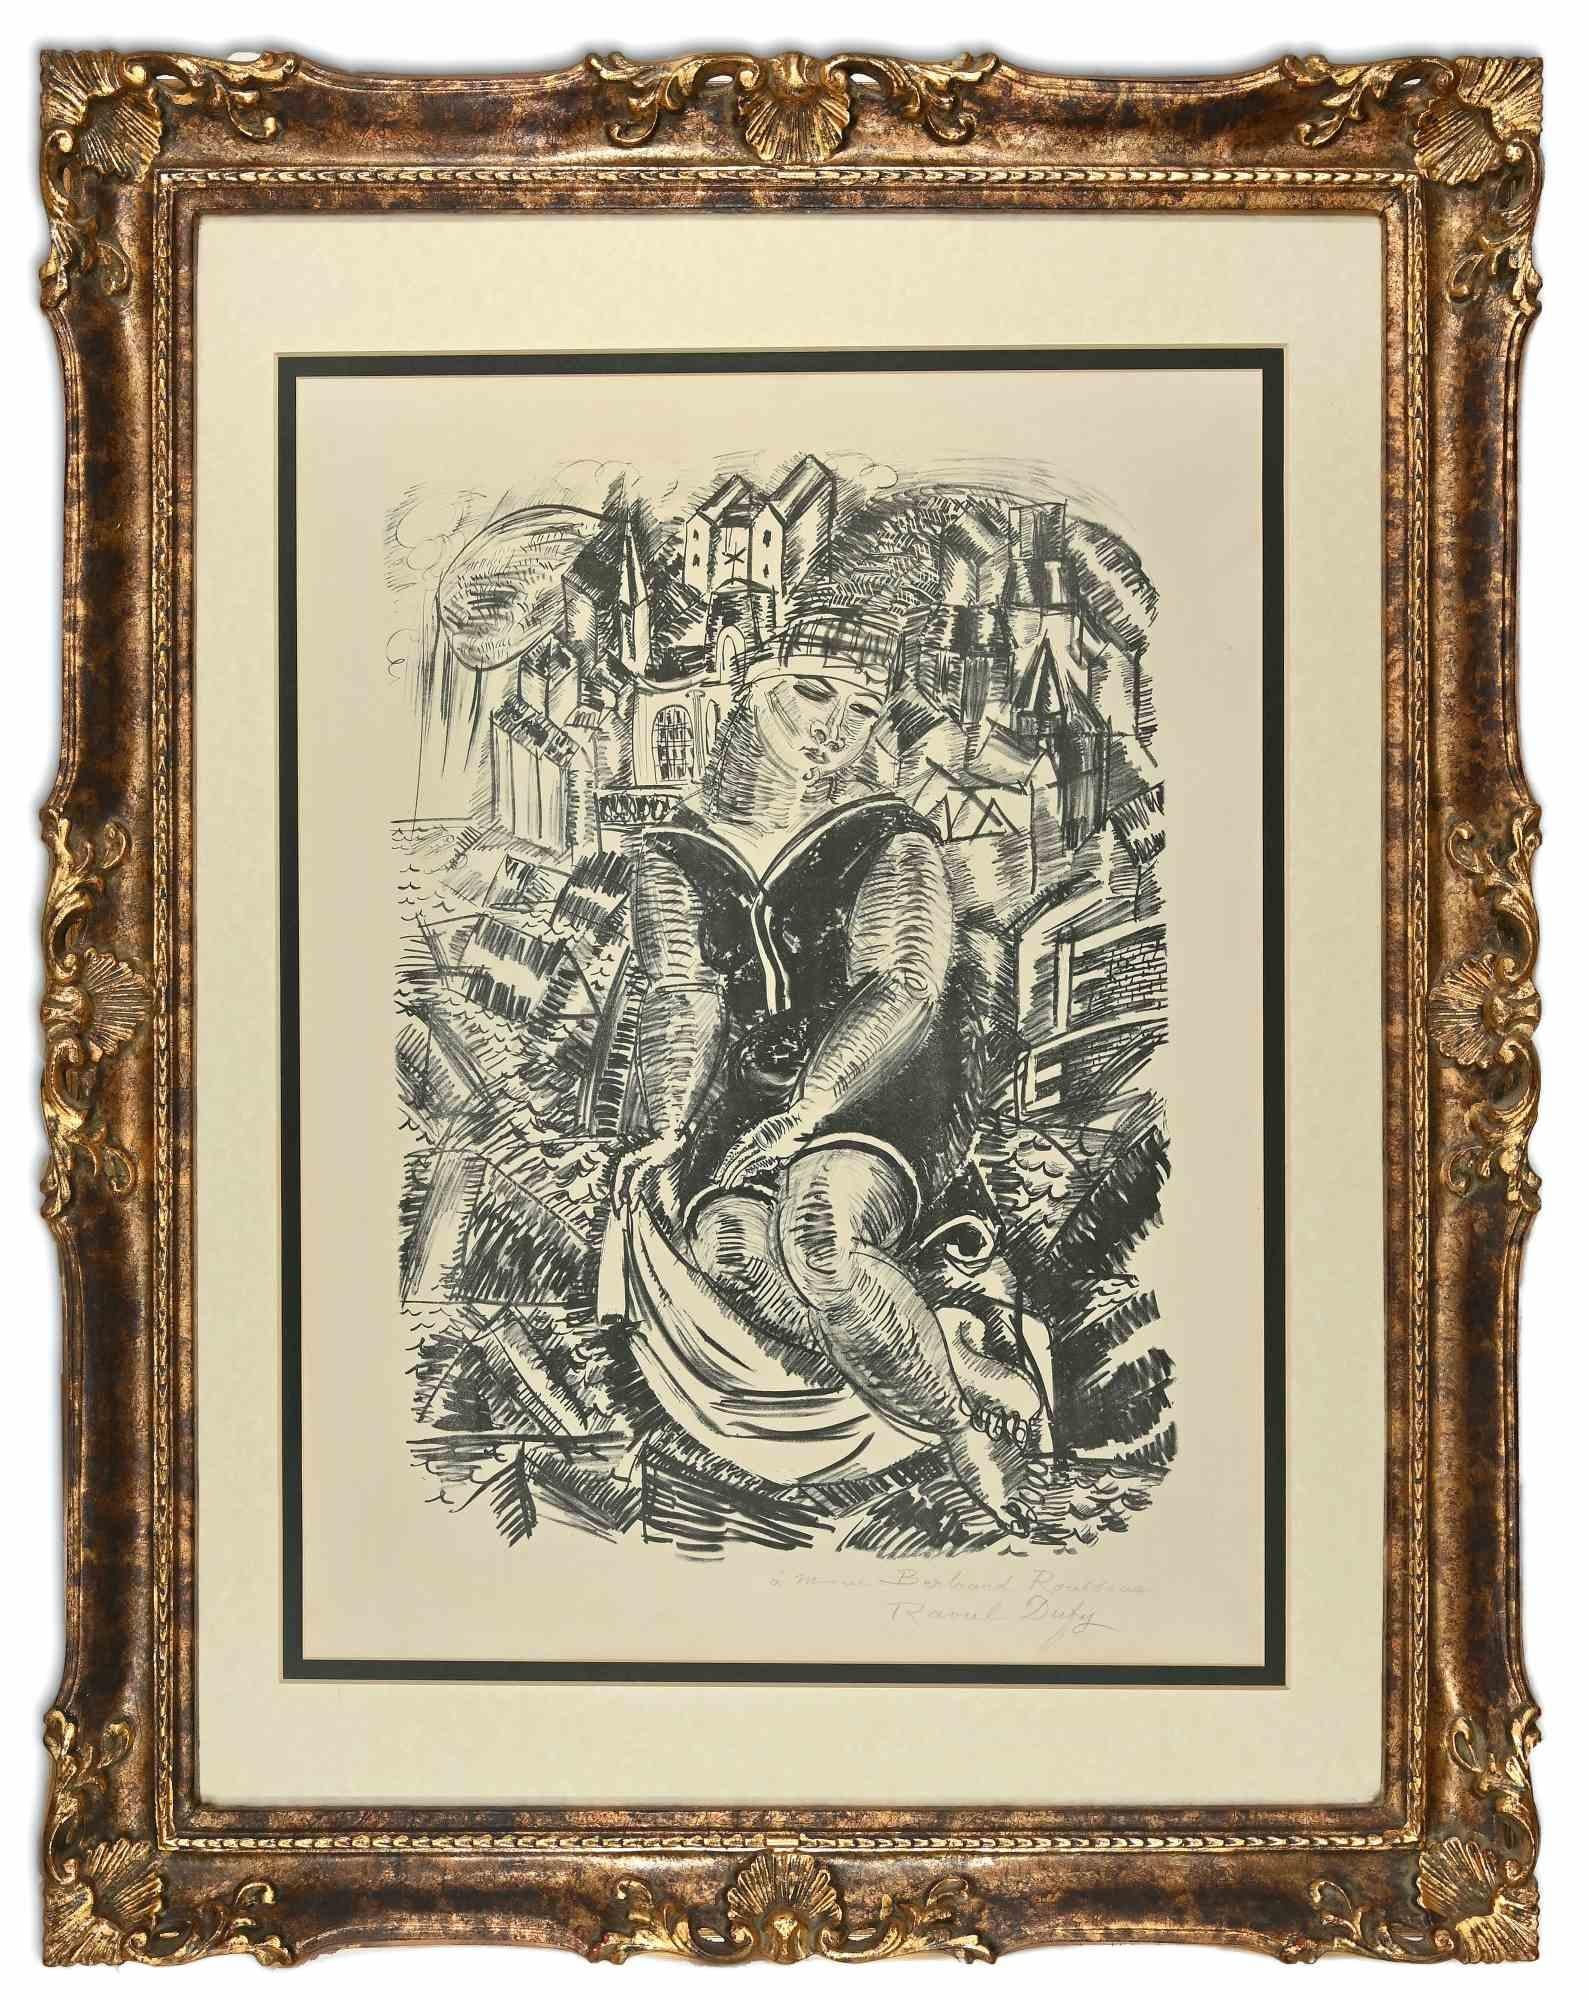 Baigneuse Devant un Port (Sainte-Adresse) is an original moder artwork realized by Raould Dufy in 1920s

Original Lithograph.

Artist's proof, aside from the edition of approximately 50.

Hand Signed in pencil and with an hand-written dedication  on